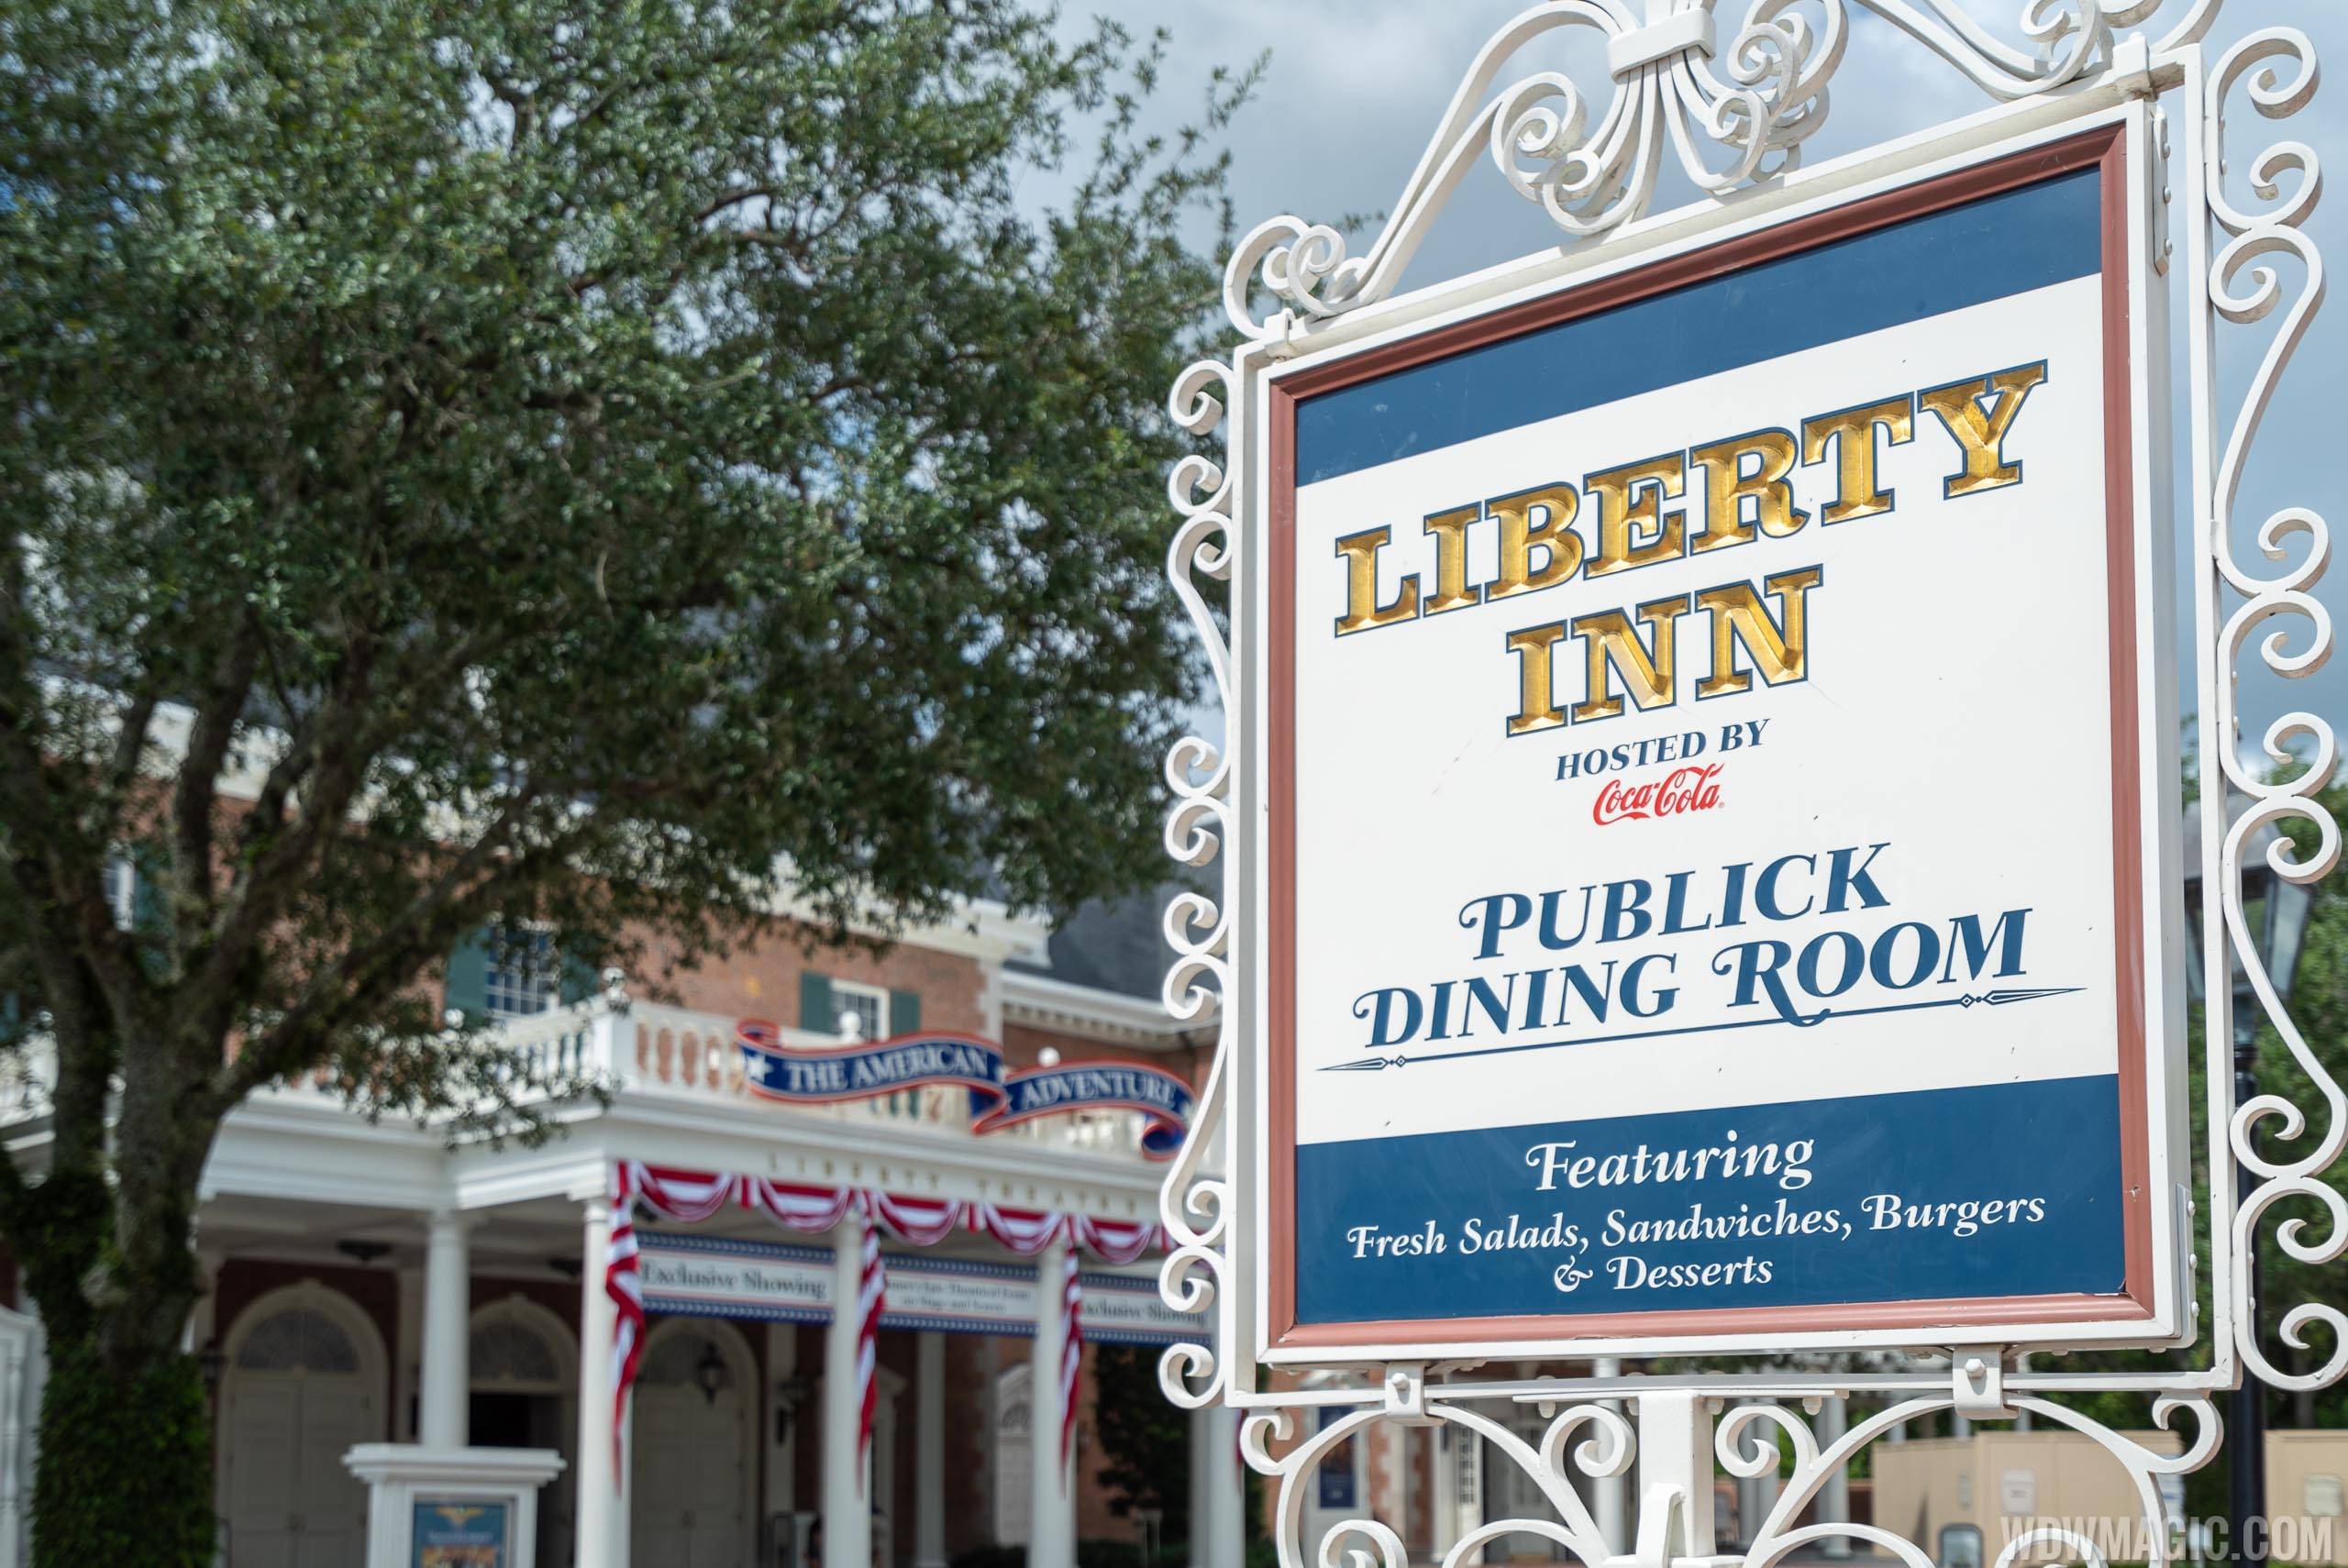 Regal Eagle Smokehouse Craft Drafts and Barbecue replacing the Liberty Inn at Epcot